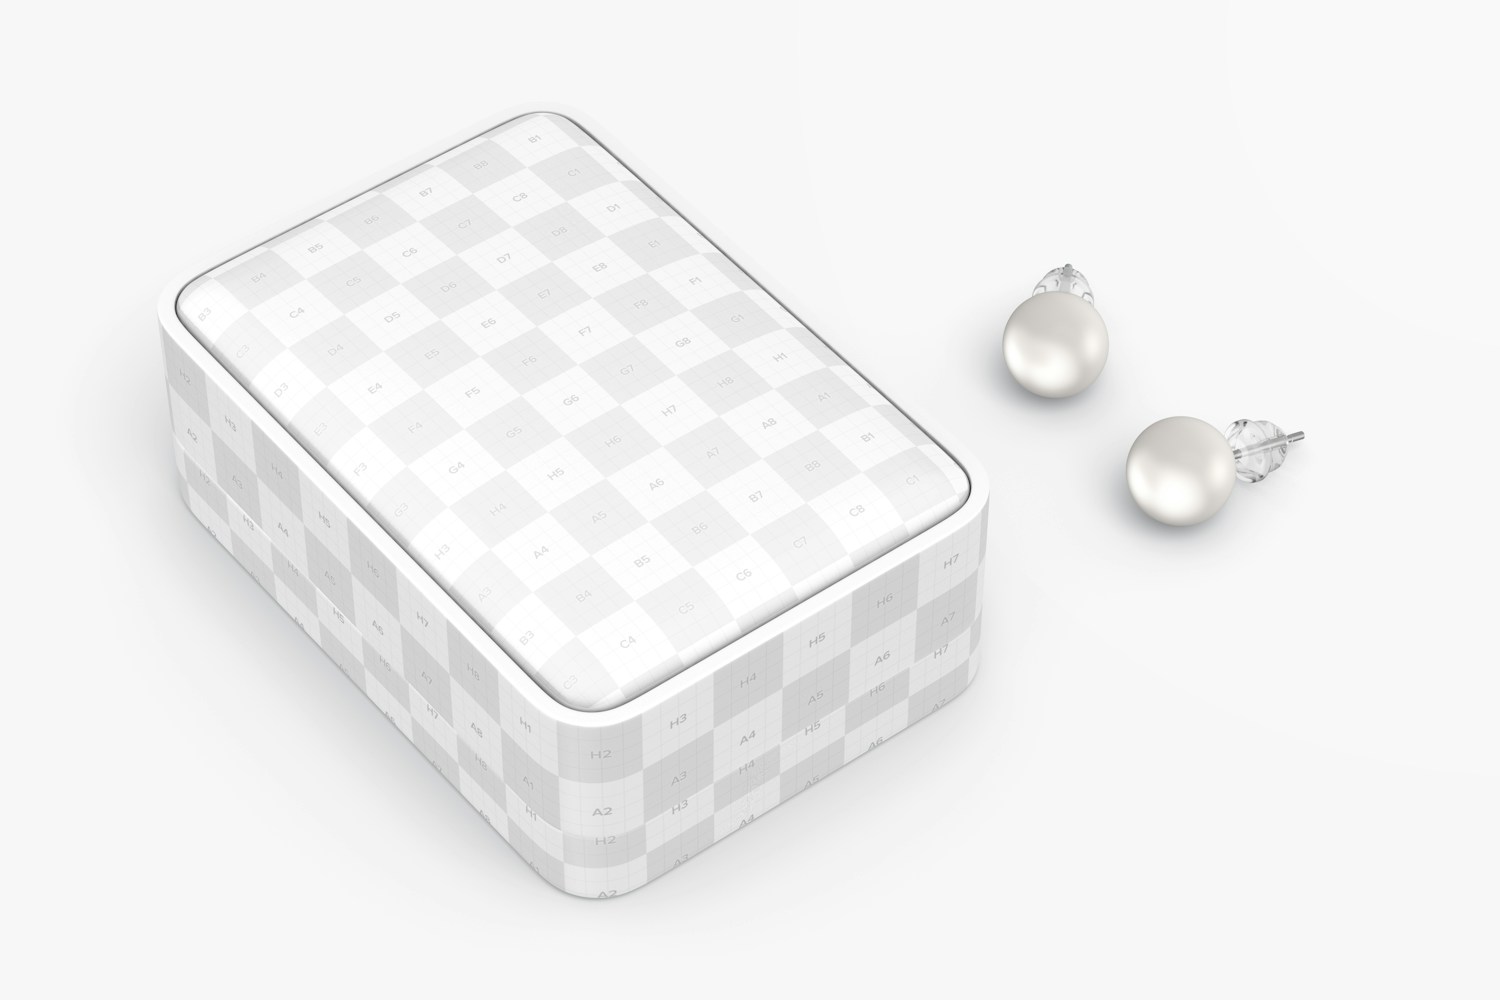 Pendent Box Mockup, Perspective View